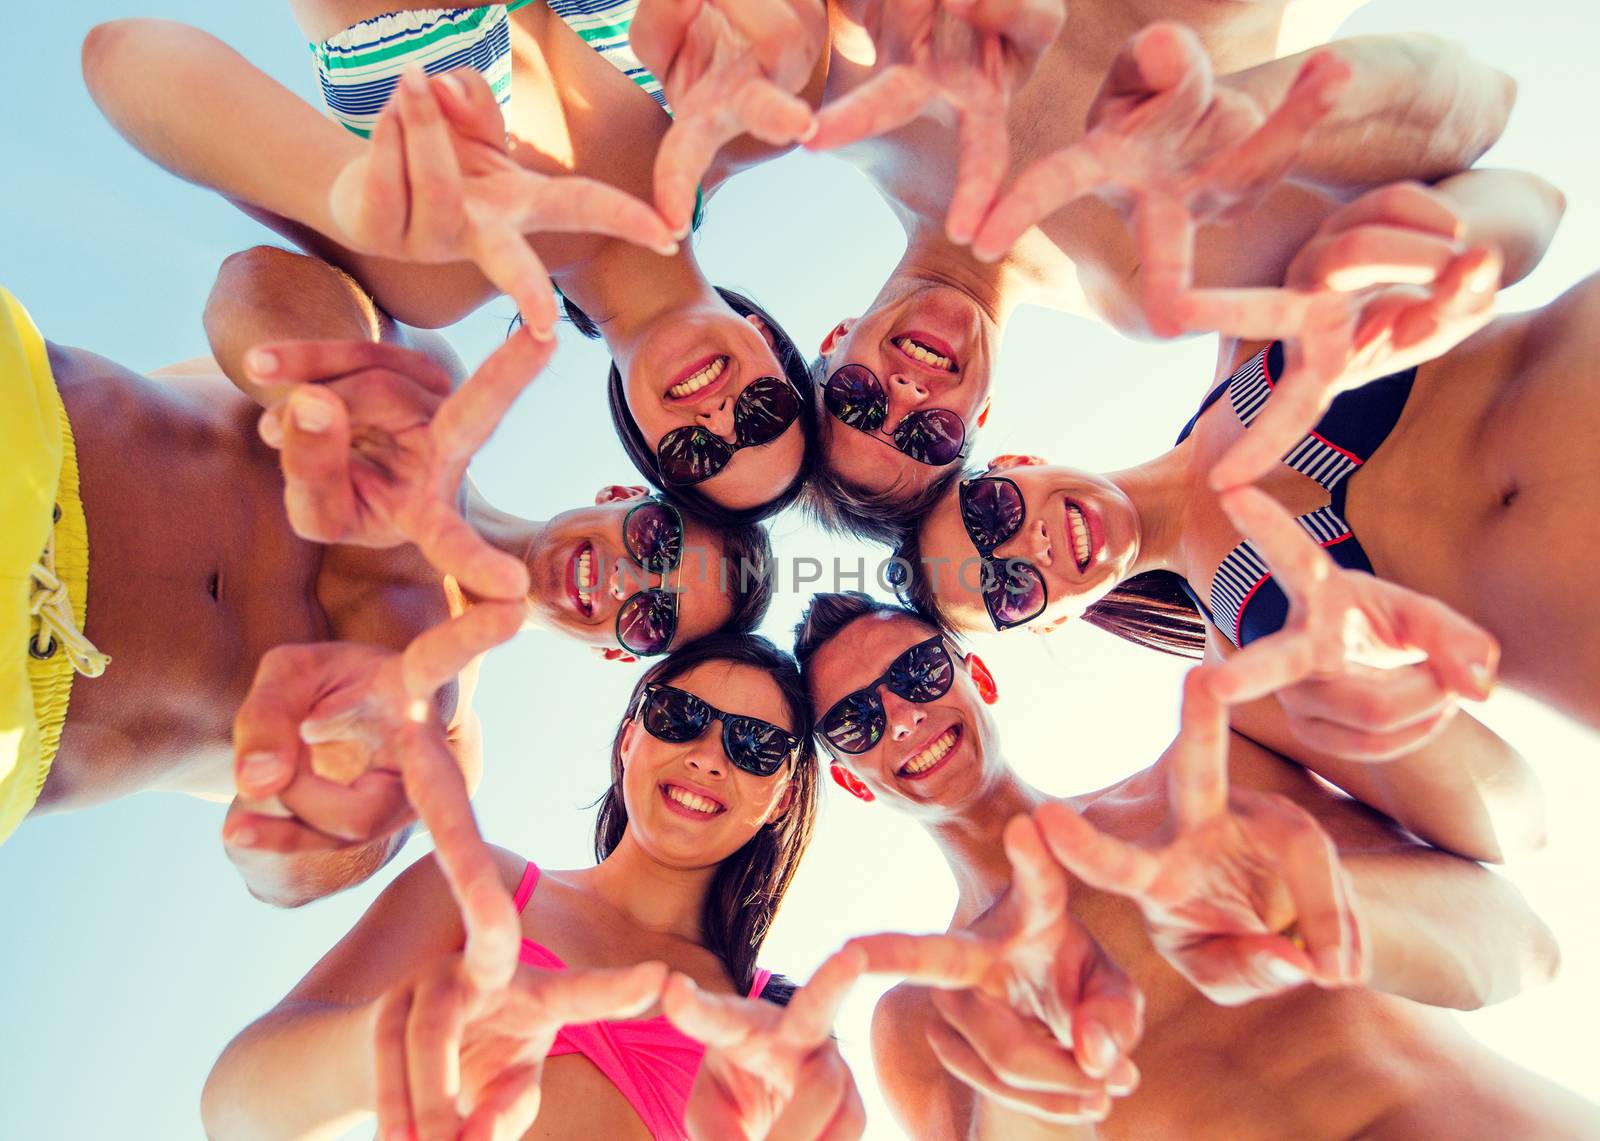 friendship, happiness, summer vacation, holidays and people concept - group of smiling friends wearing swimwear and showing victory or peace sign standing in circle over blue sky